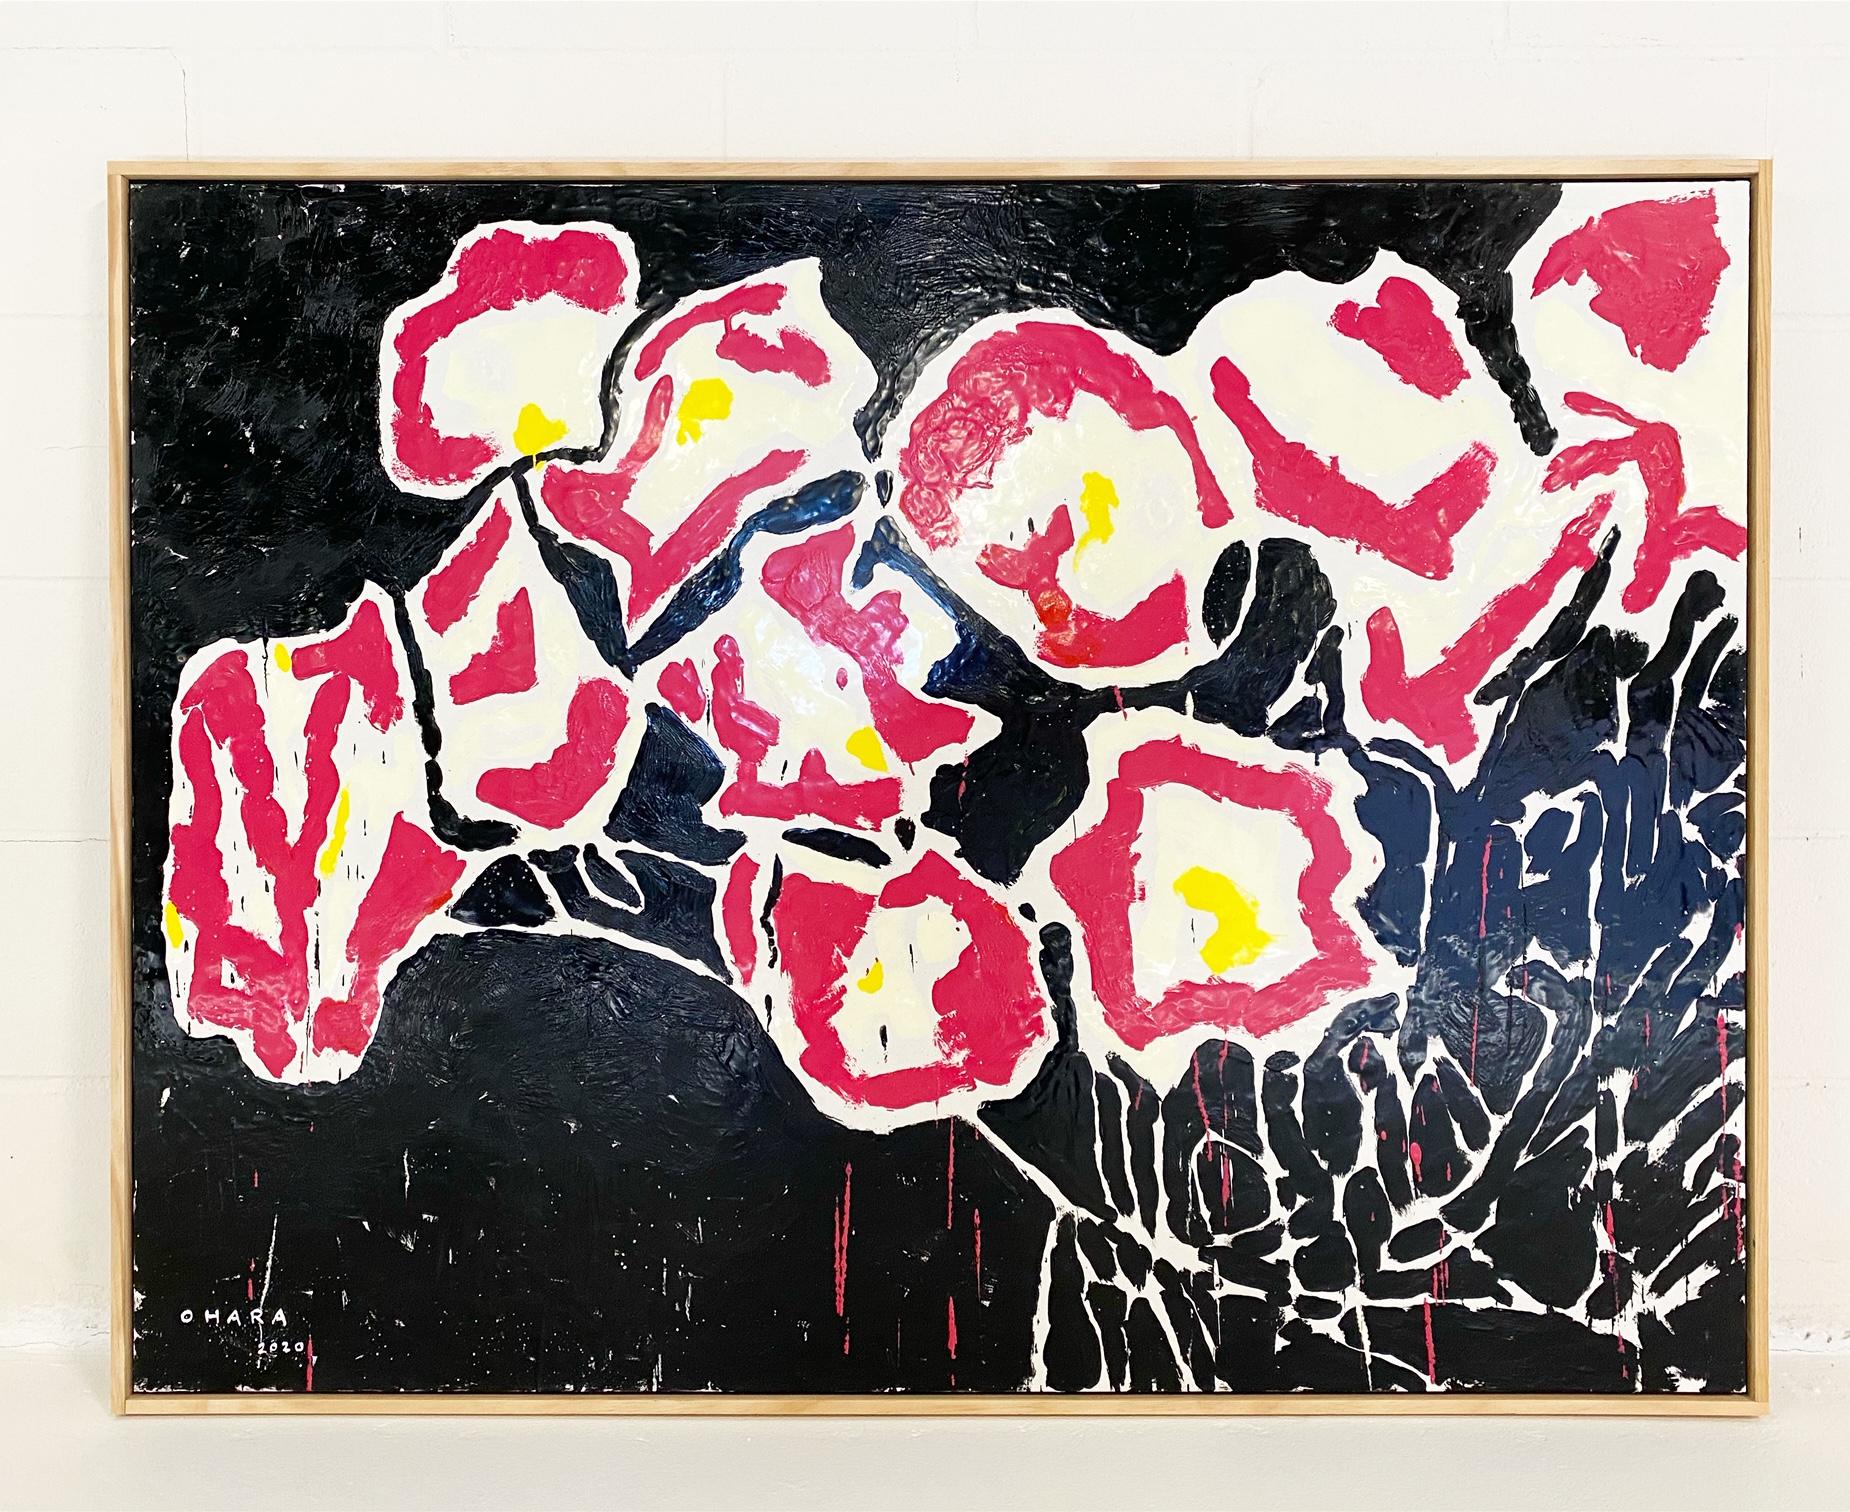 In Botanical series.
Encaustic on board.

We are proud to be the exclusive gallery of John O'Hara (American, b. 1963). O'Hara is a self-taught artist from St. Louis and is known for his large-scale abstract decorative pieces. His medium of choice